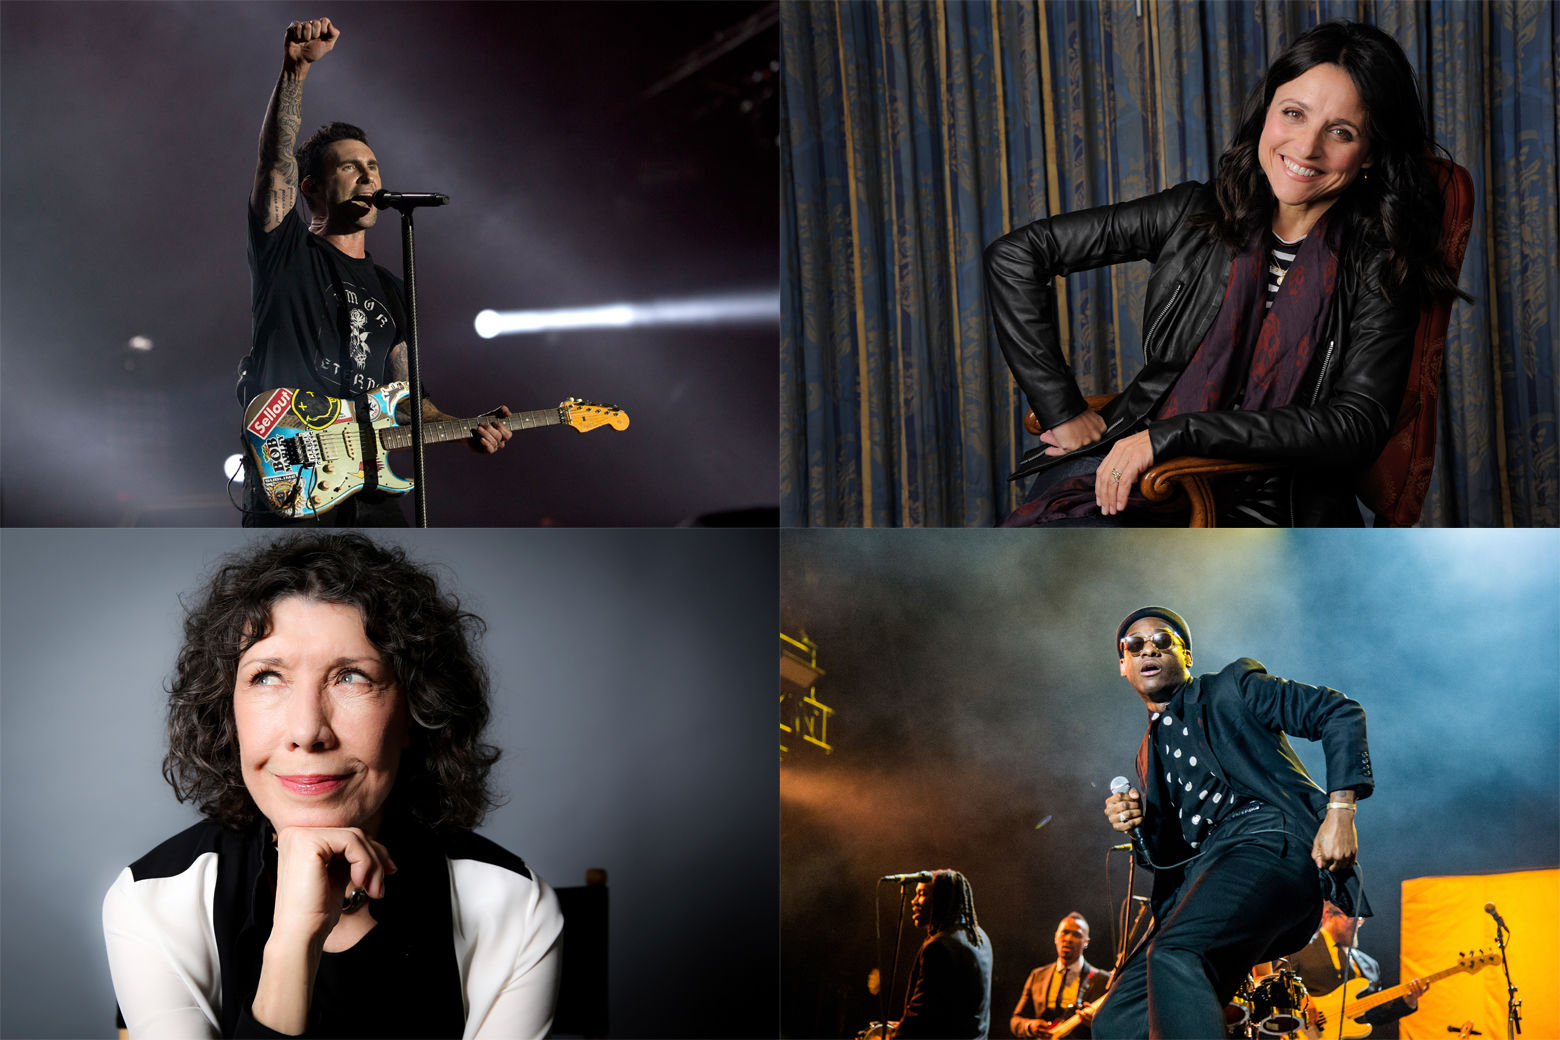 Maroon 5, Julia Louis-Dreyfus, Leon Bridges and Lily Tomlin area ll coming to D.C. in October. (WTOP collage via AP)